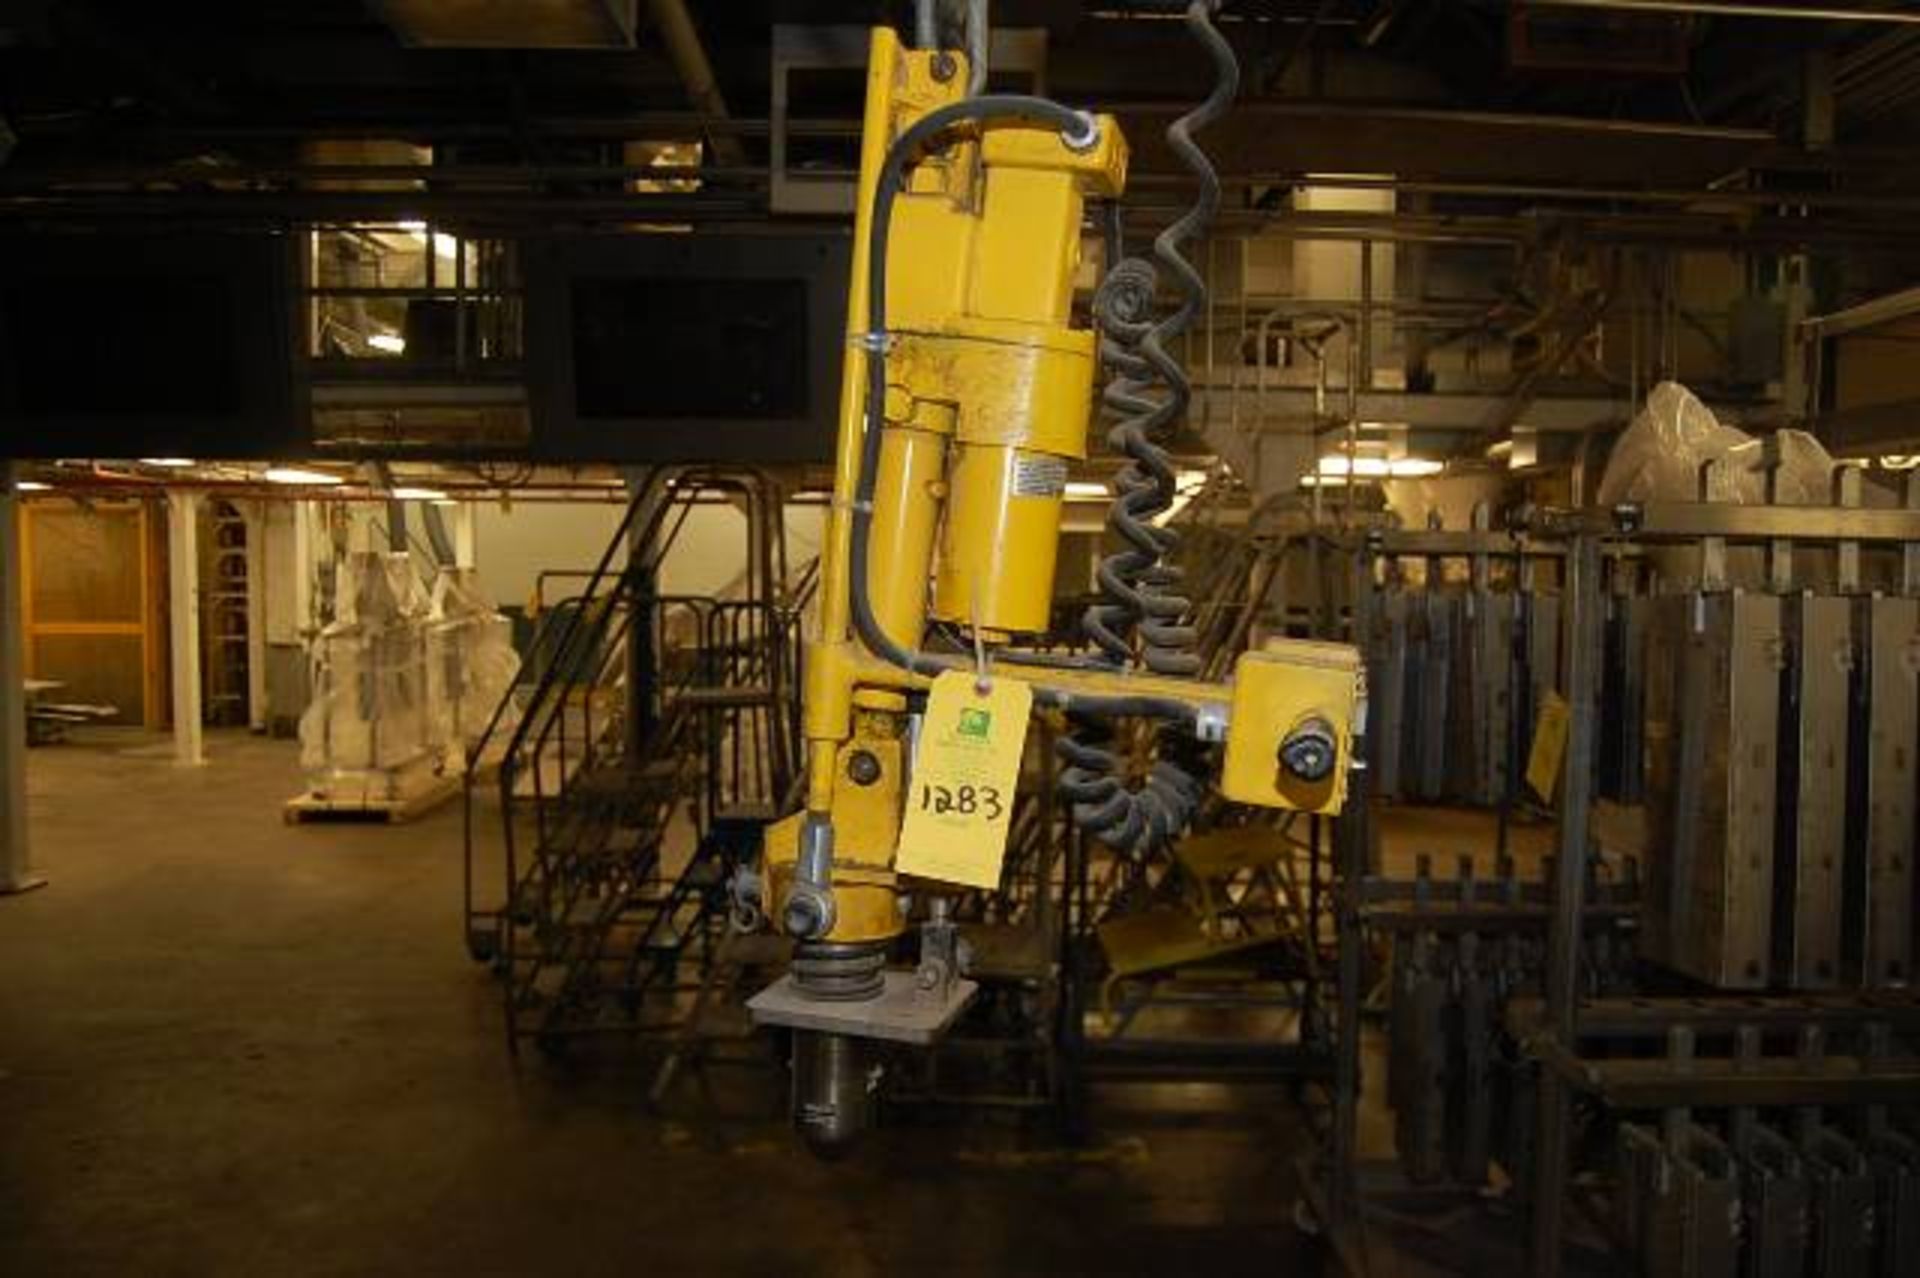 CM Loadstar Electric Chain Hoist, Includes LSI Model #4494/76-2A Lift Accessory - Image 2 of 3